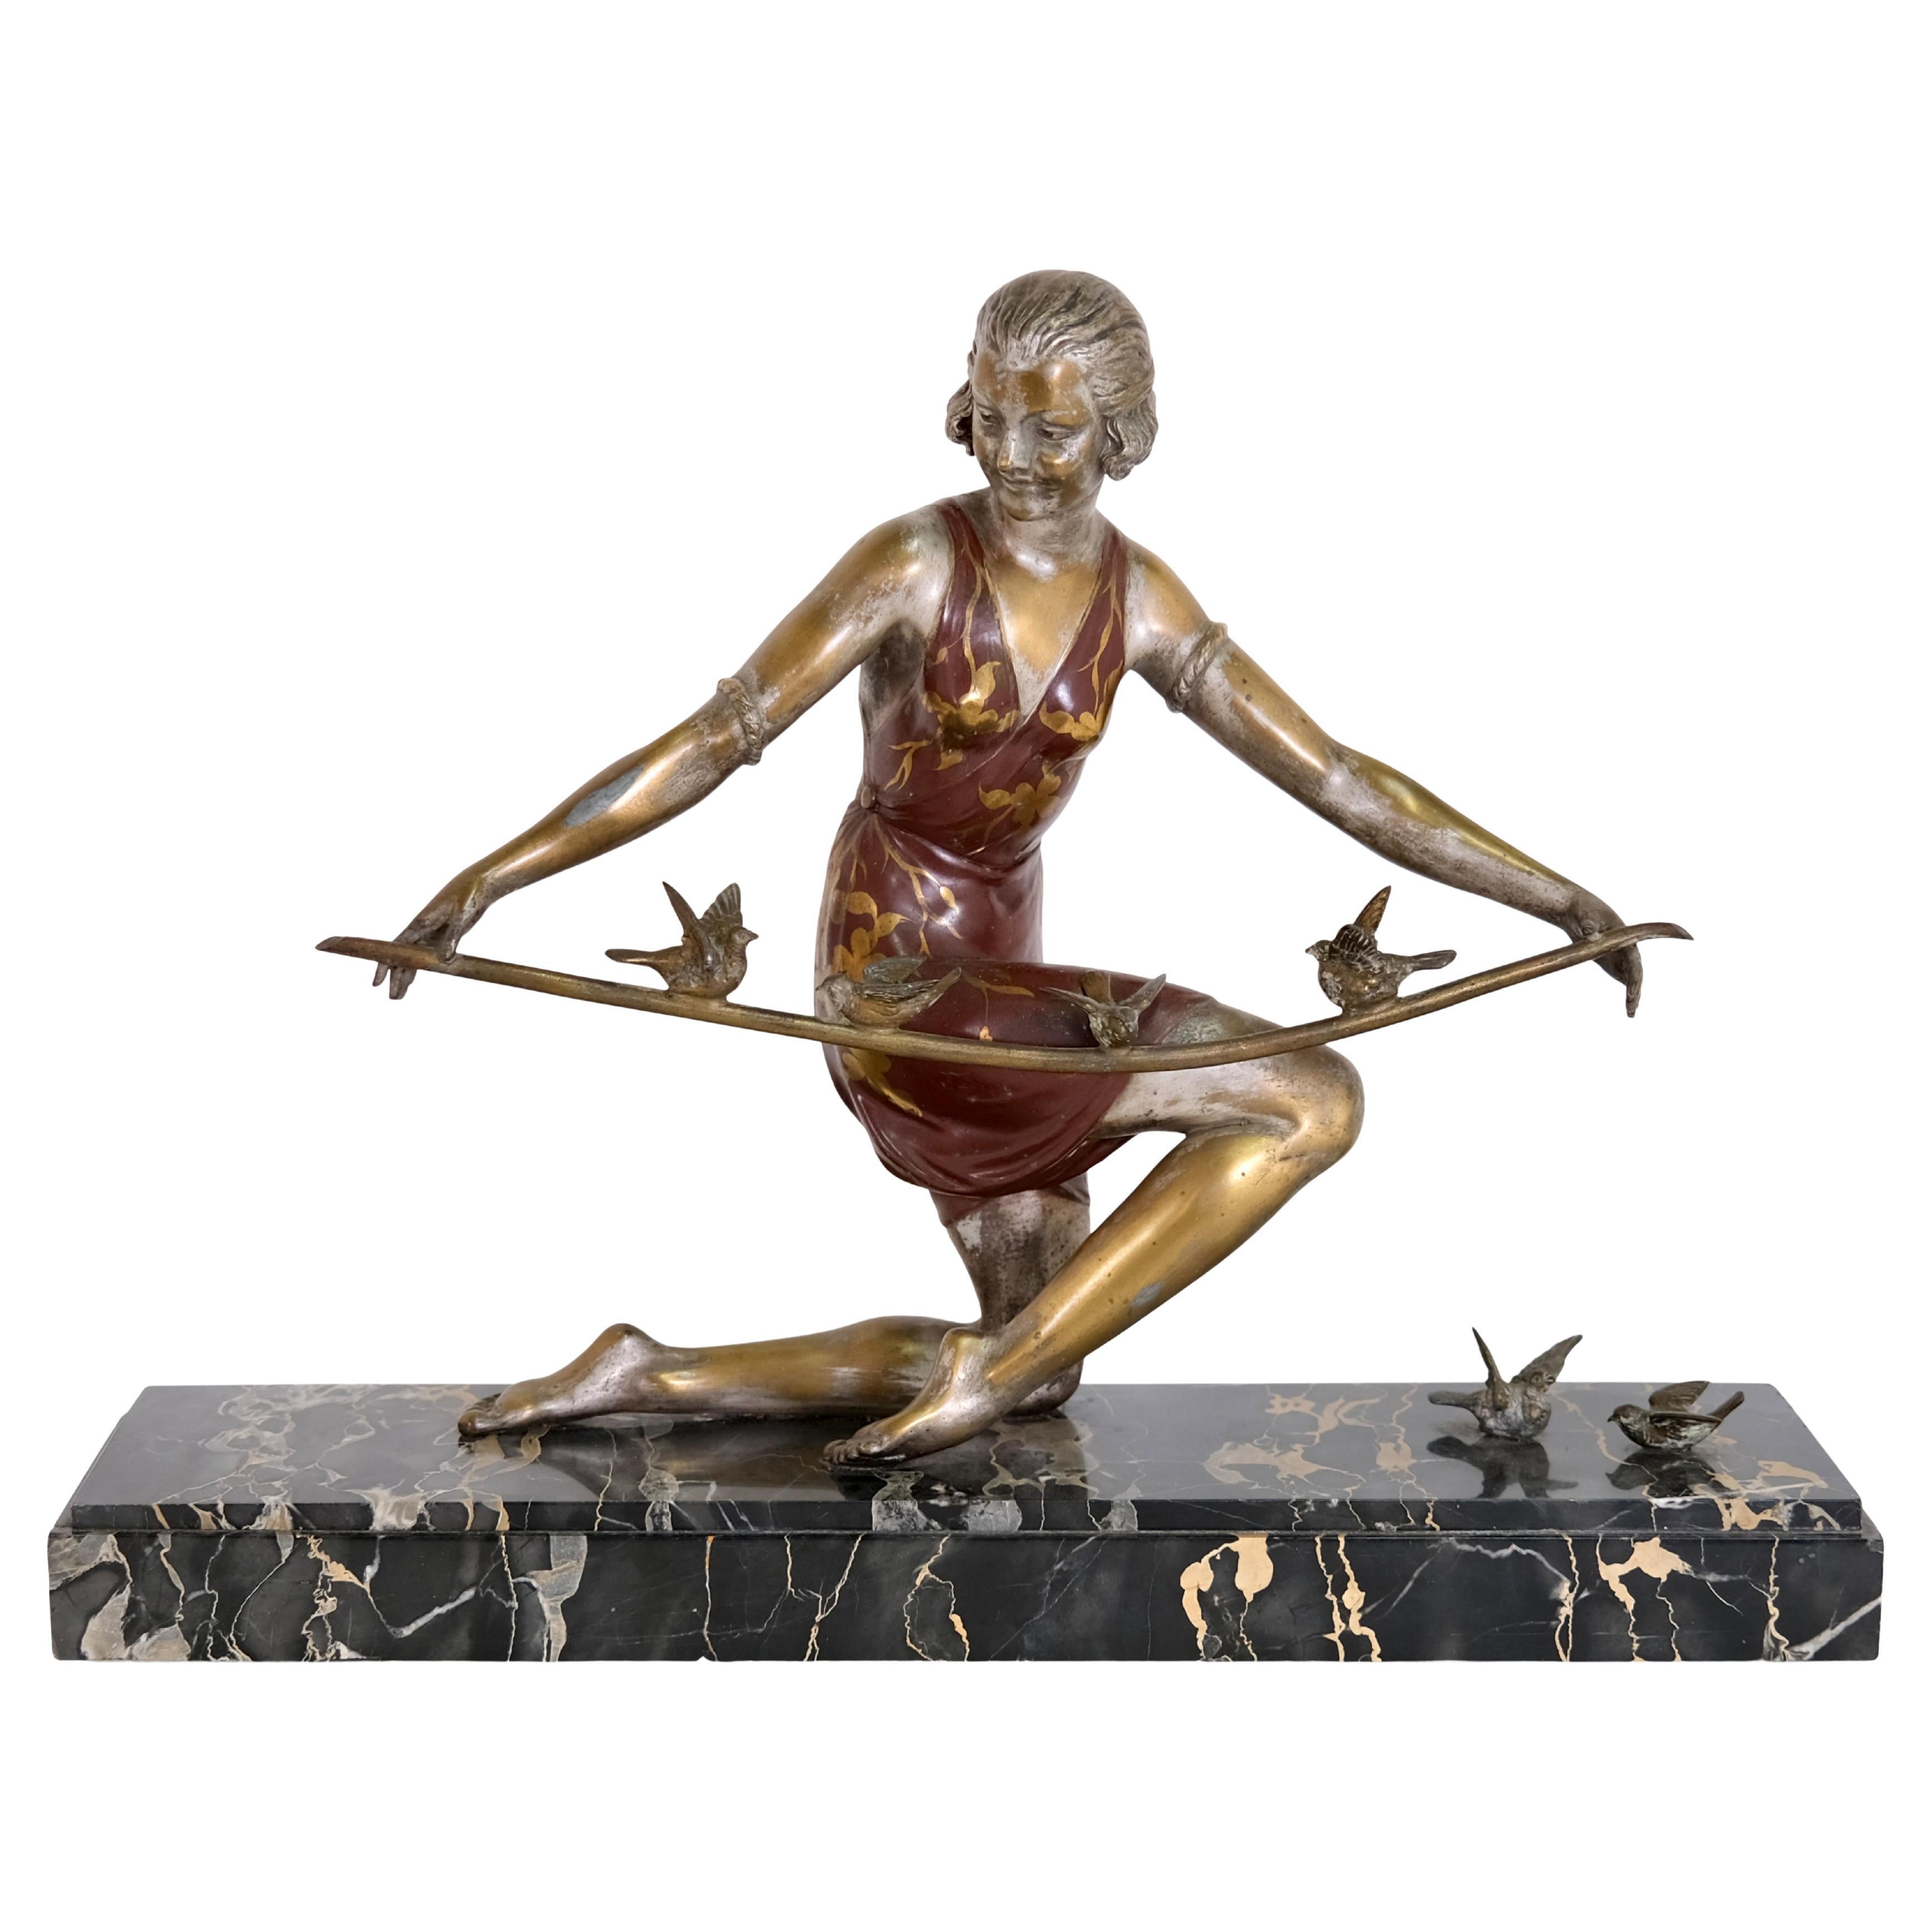 Lovely Art Deco Bronze Sculpture of a Girl with Sparrows on a Portor Marble Base